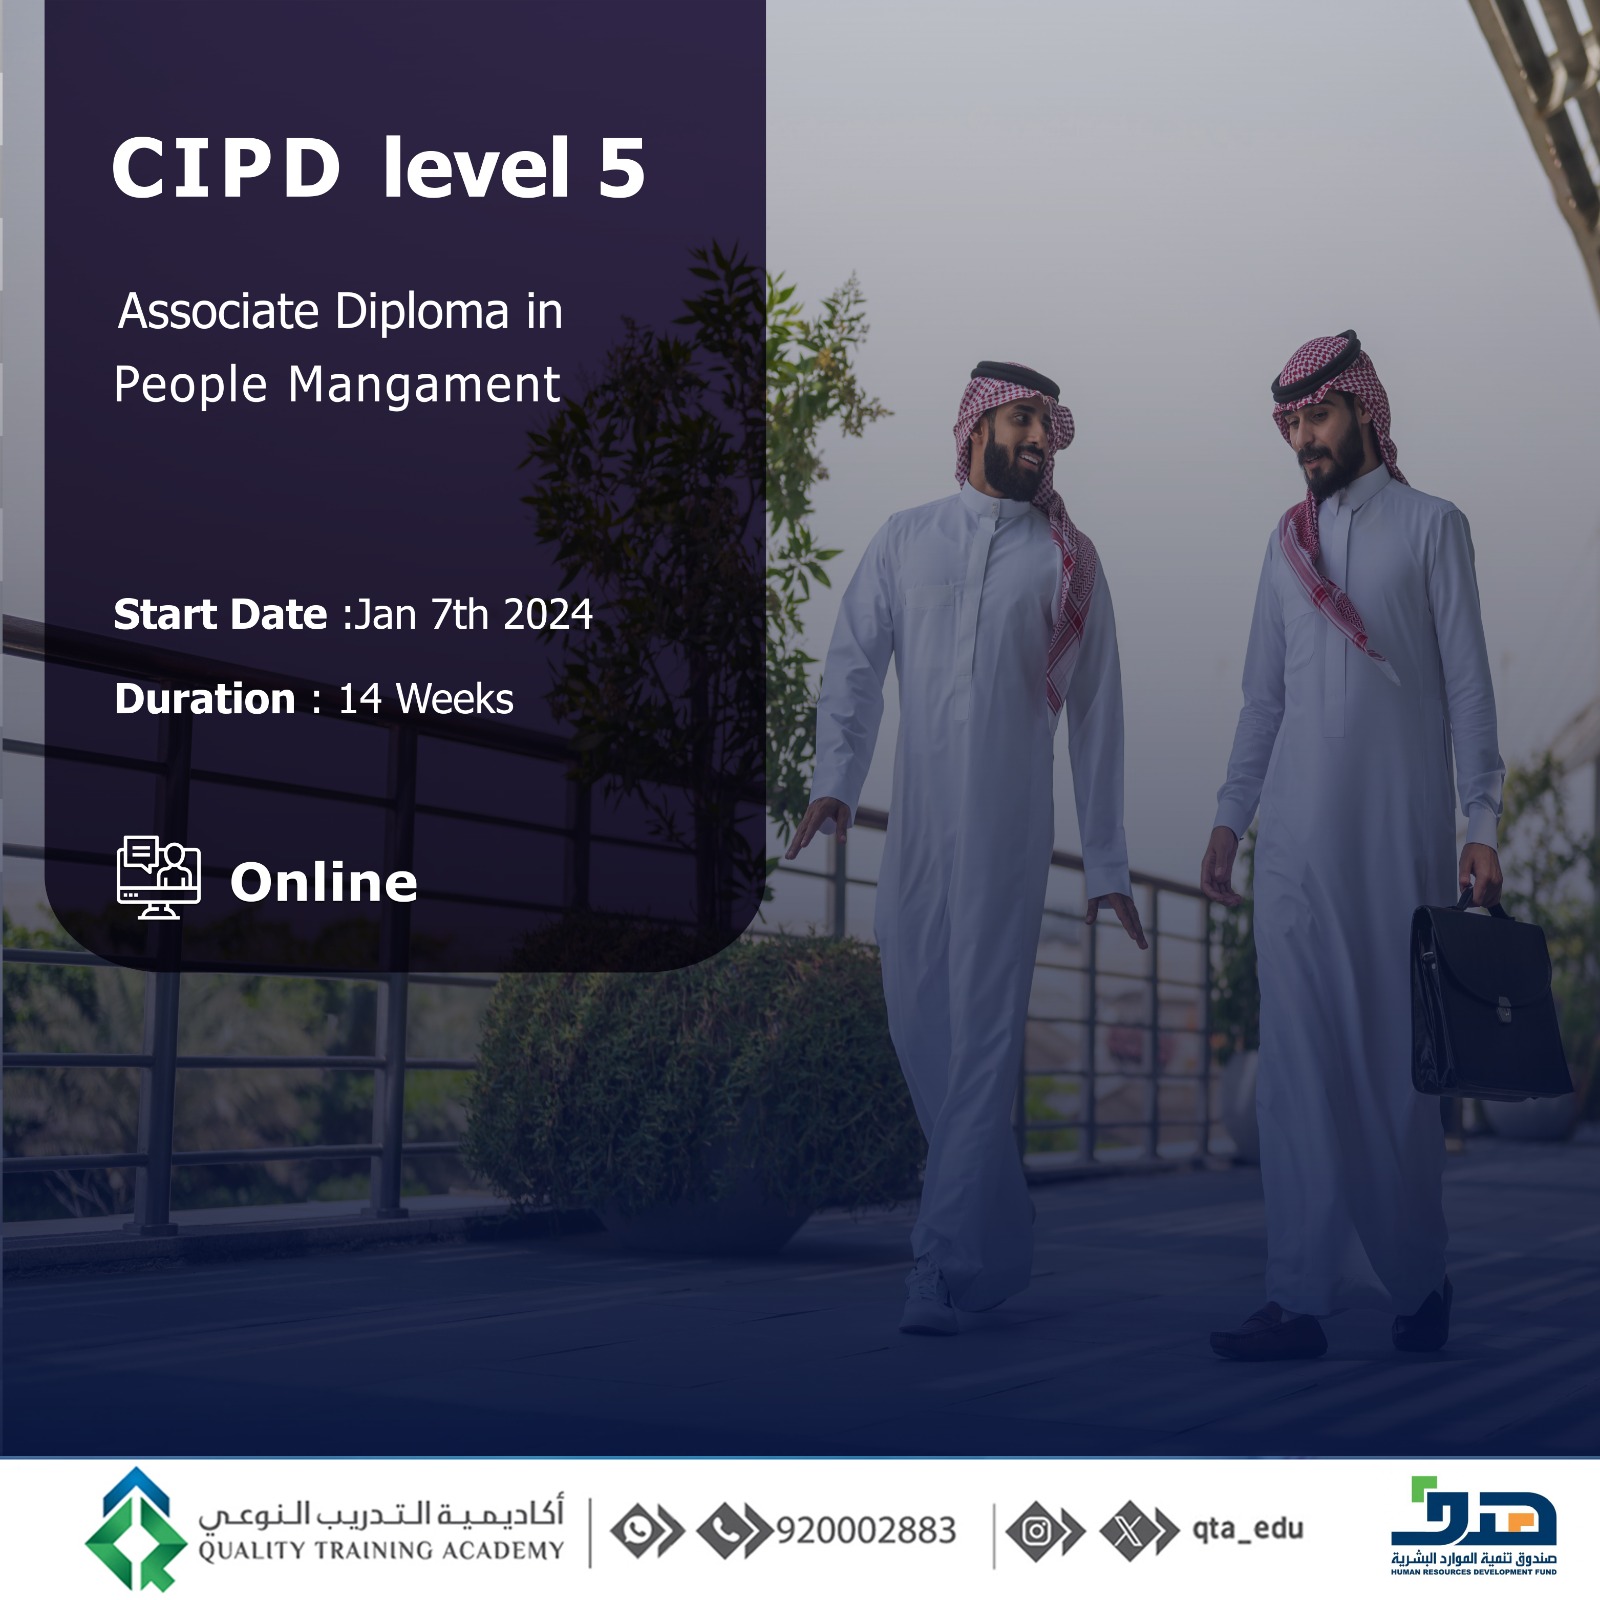 Associate Diploma in People Management – CIPD (Level 5)